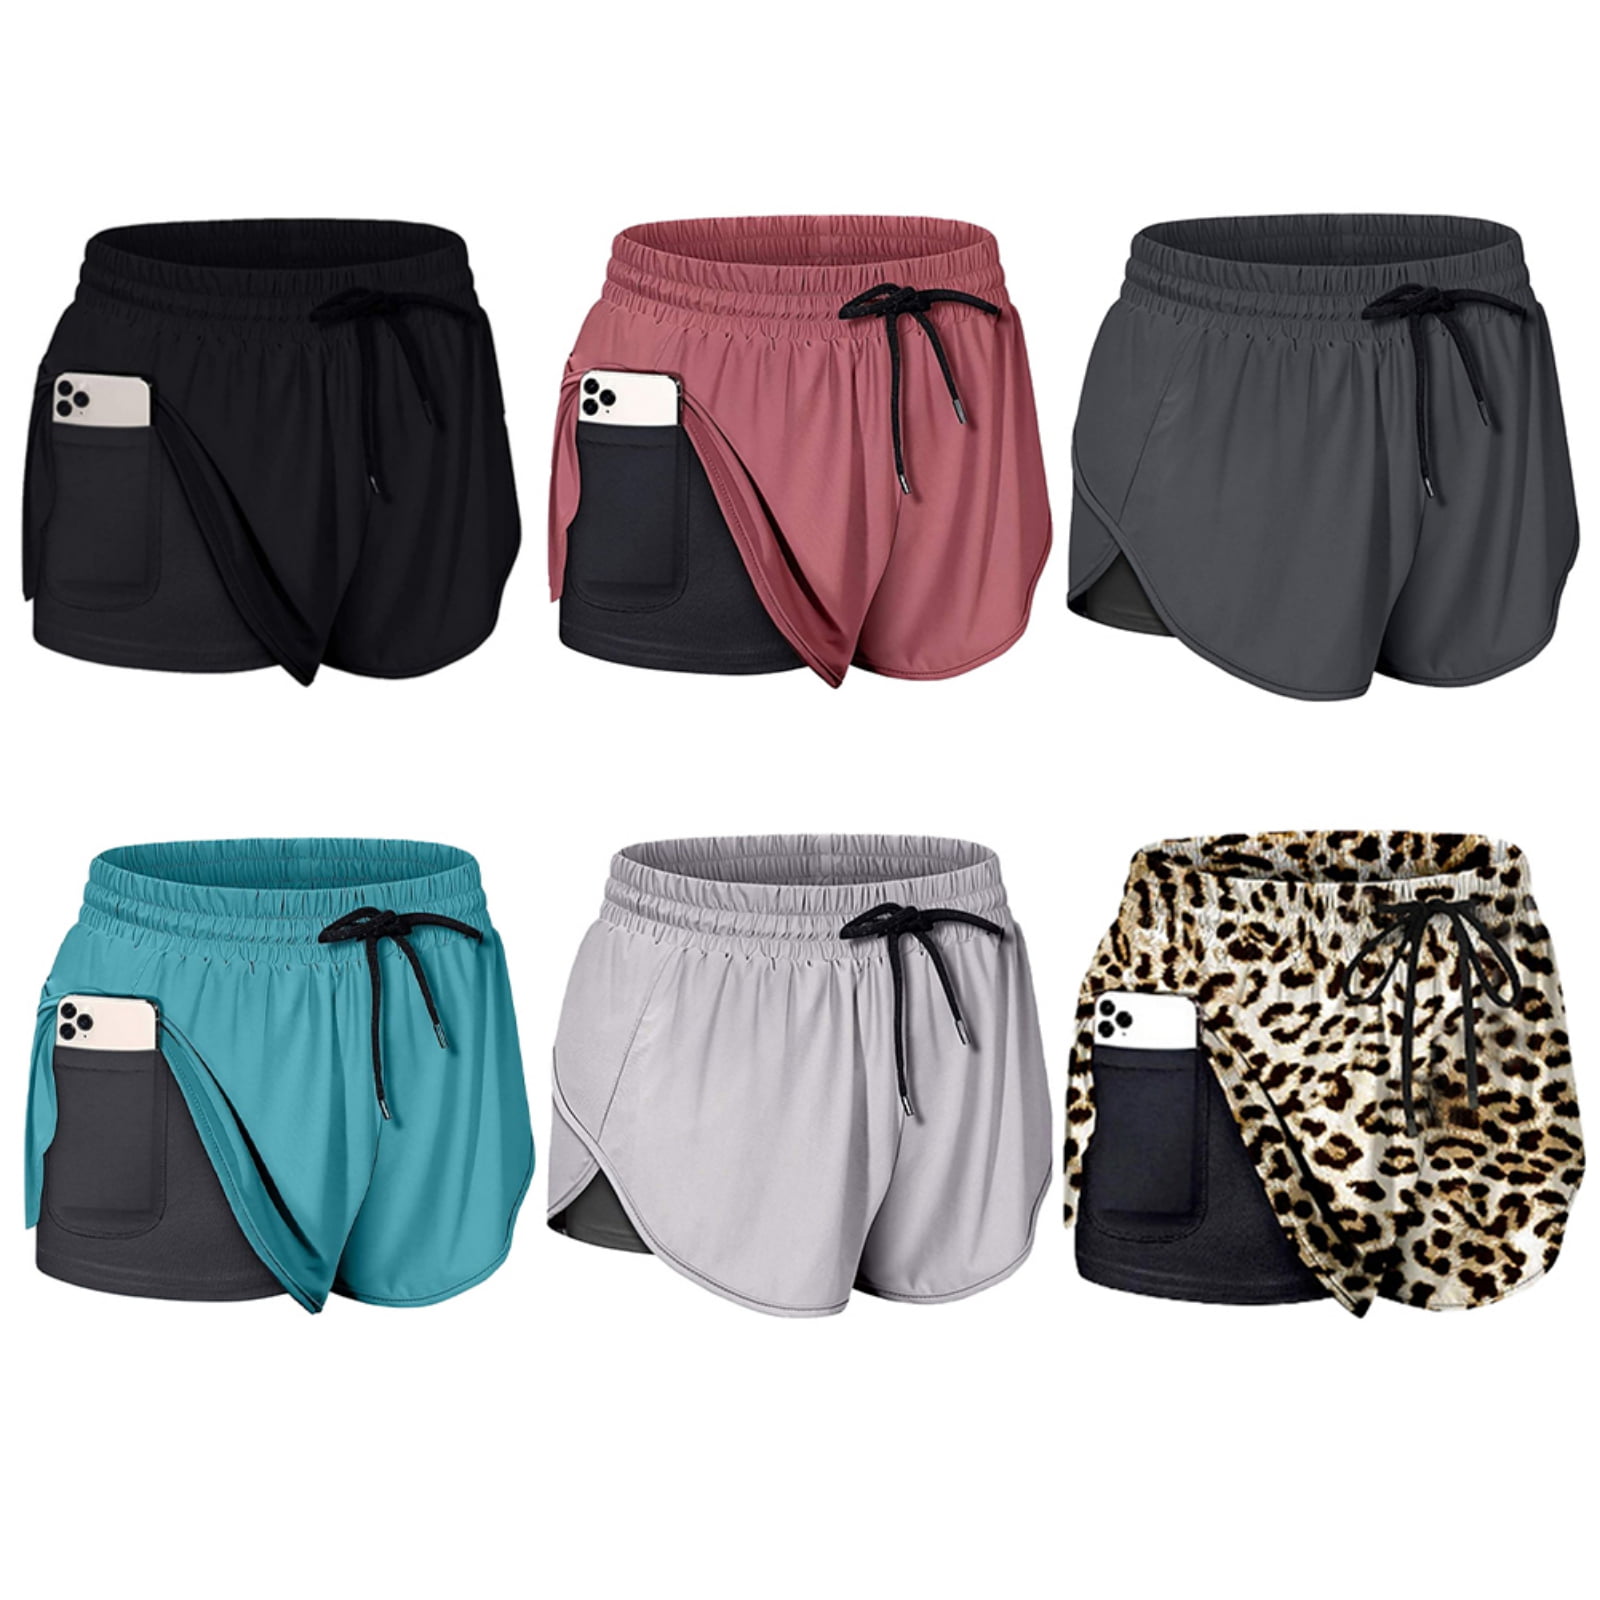 Women's 2 in 1 Running Shorts Workout Shorts Double Layer Shorts Elastic  Waist Quick Dry Short with Pockets Athletic Yoga Sports Shorts 